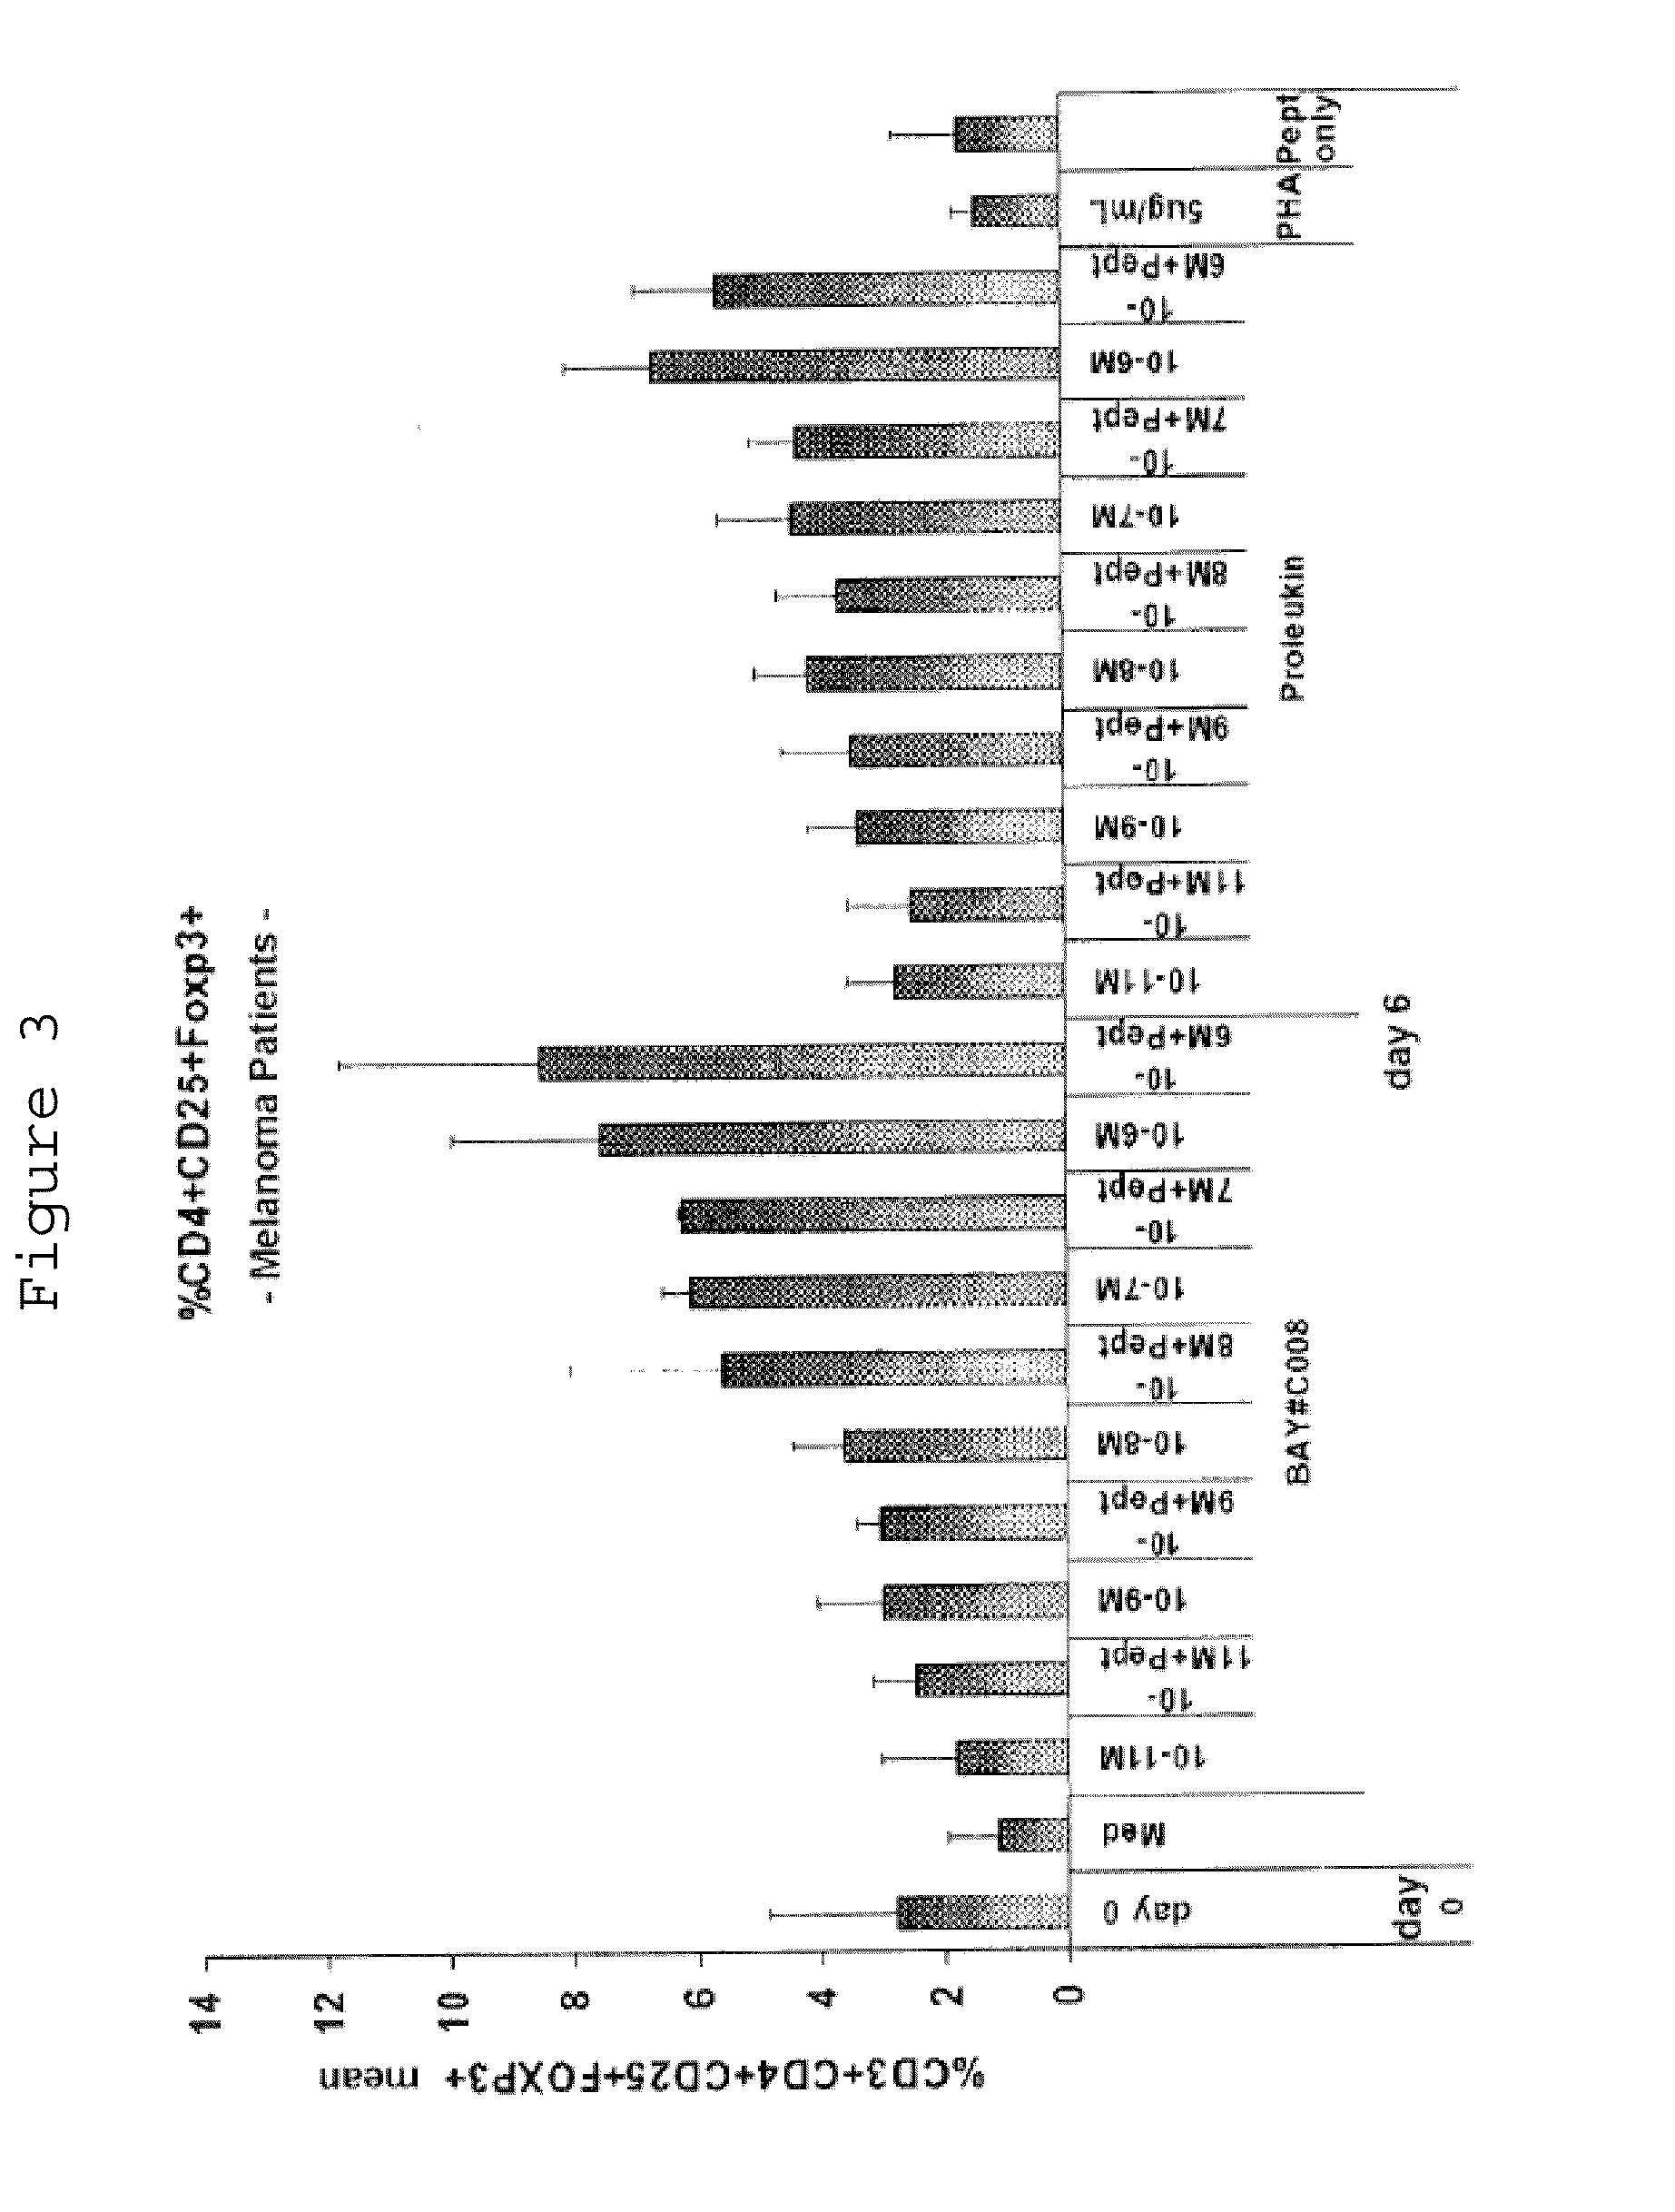 Agent for the treatment and/or prophylaxis of an autoimmune disease and for the formation of regulatory t cells